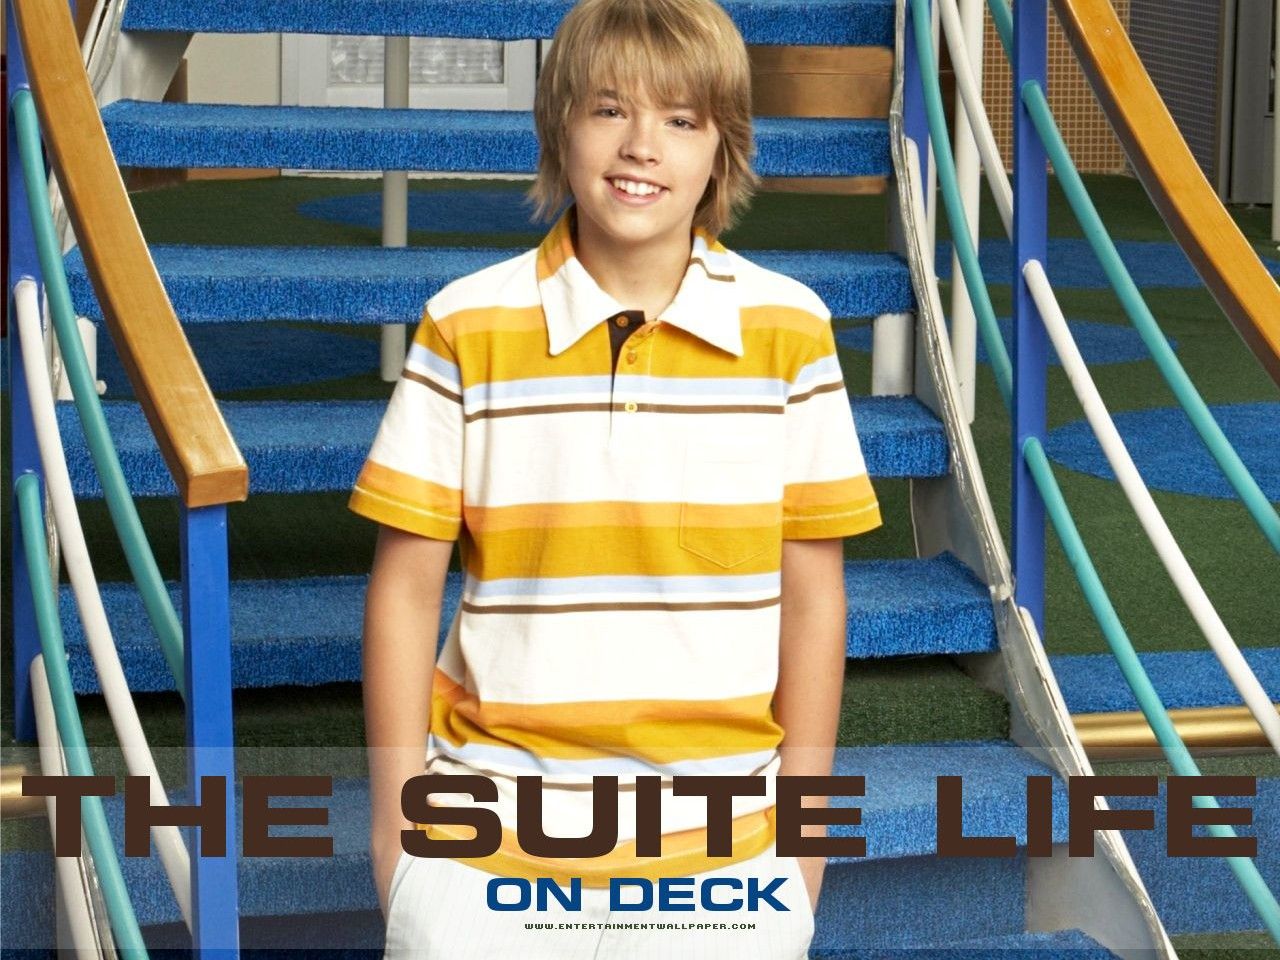 The Suite Life On Deck Wallpaper